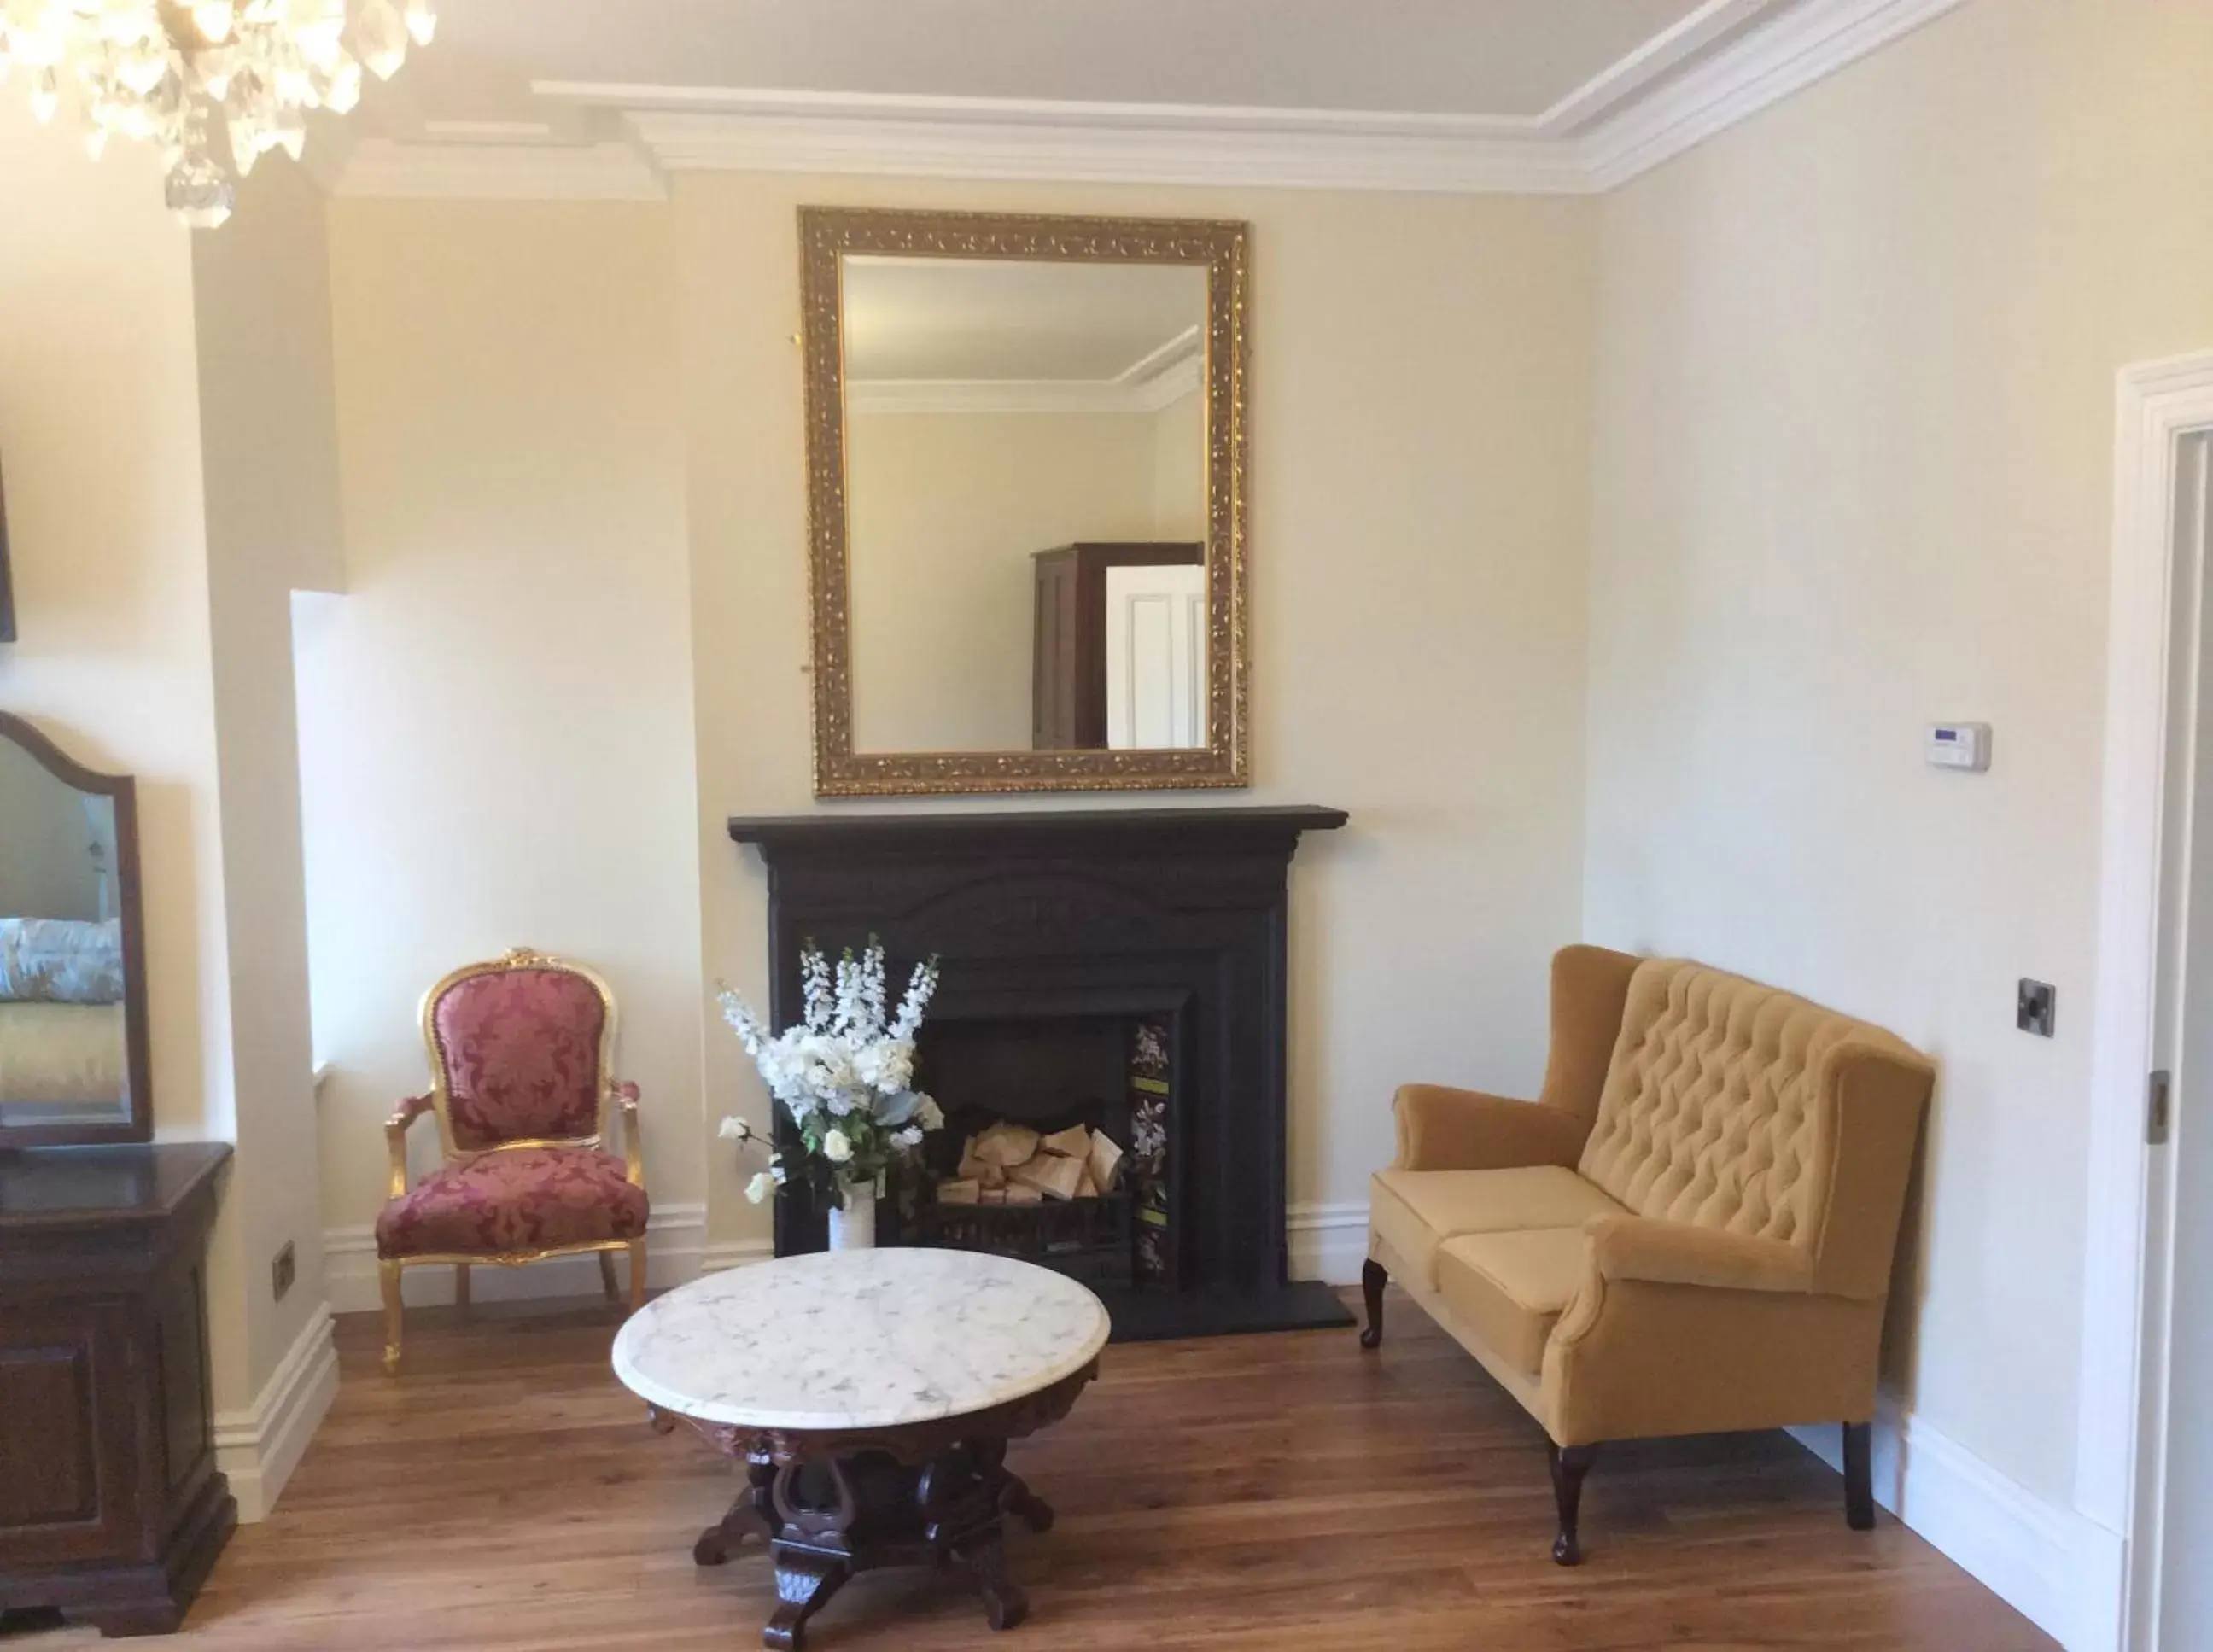 Seating Area in St Columbs House